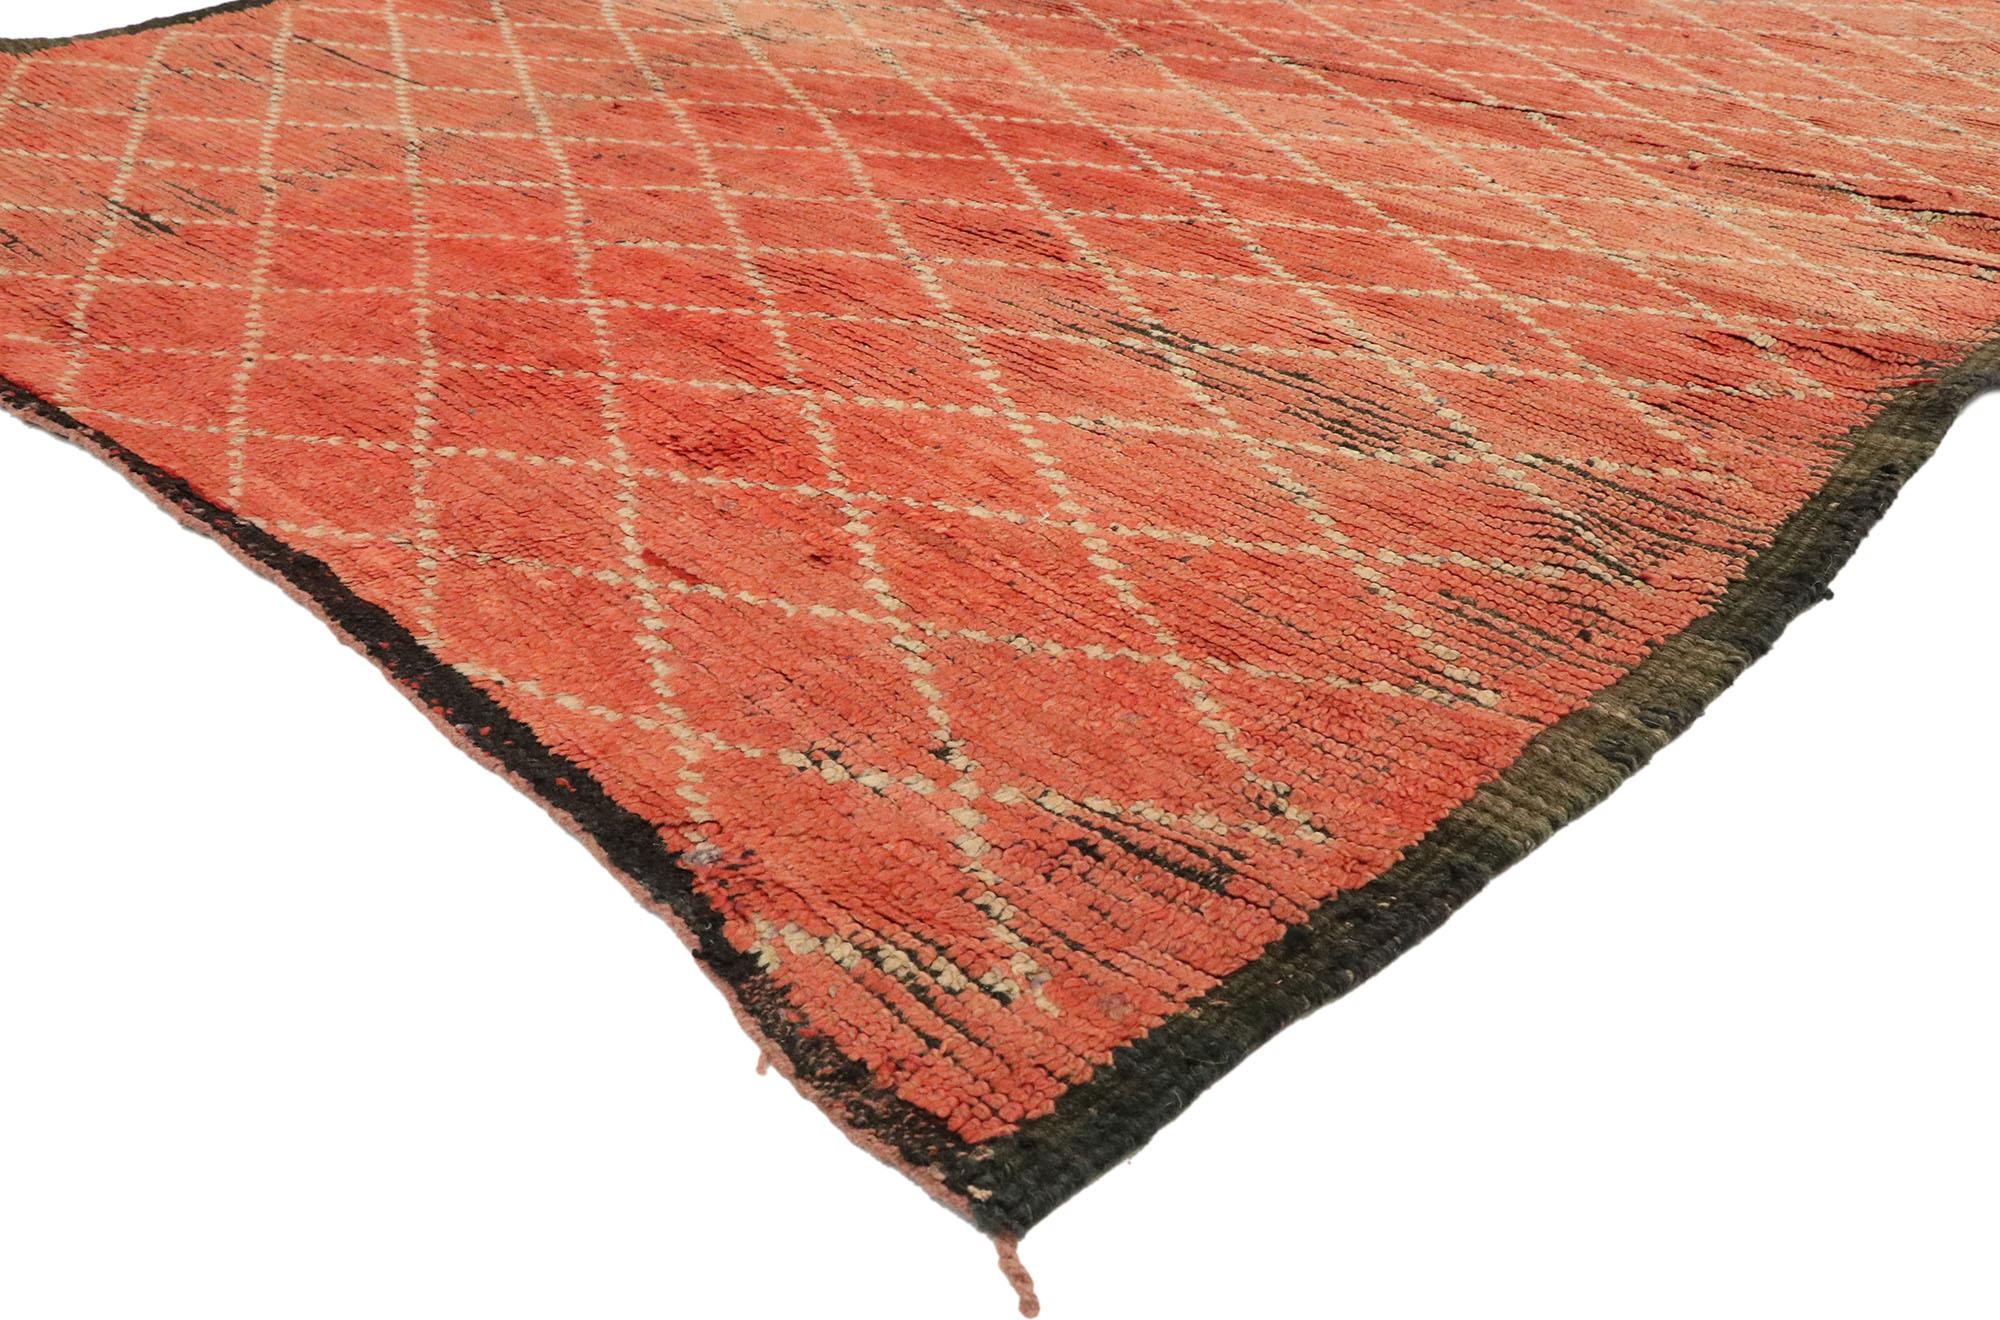 20613 vintage Berber Moroccan rug with tribal style. Subdued red emits a feeling of warmth and closeness in this vintage Berber Moroccan rug. The tribal style print weaves into small cream-colored diamonds throughout the piece. The diamond, in